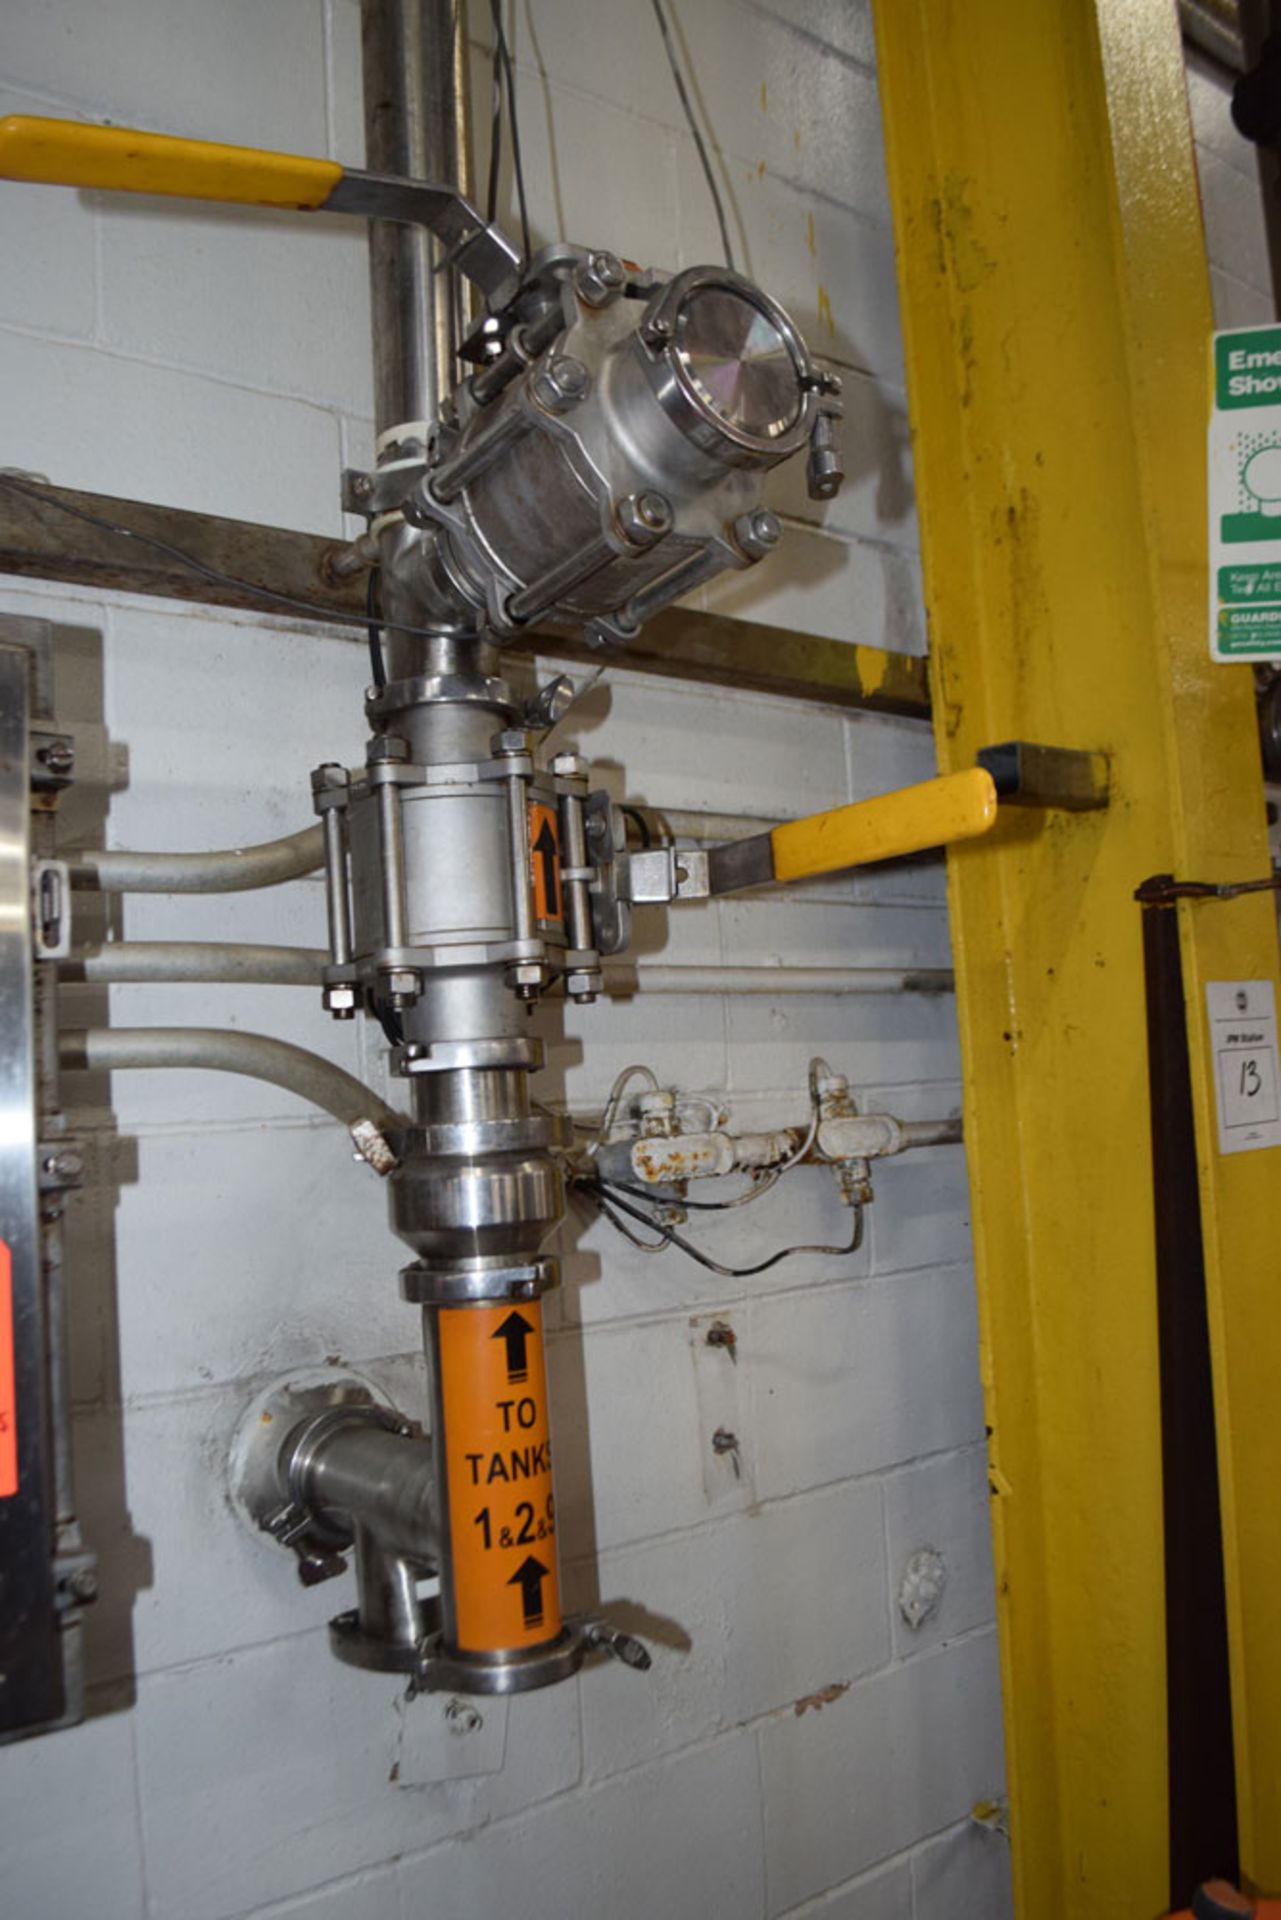 Bulk Liquid Delivery System Valves with S/S Control Cabinet by Line 2 Cooling Tunnel; Location In - Image 3 of 6